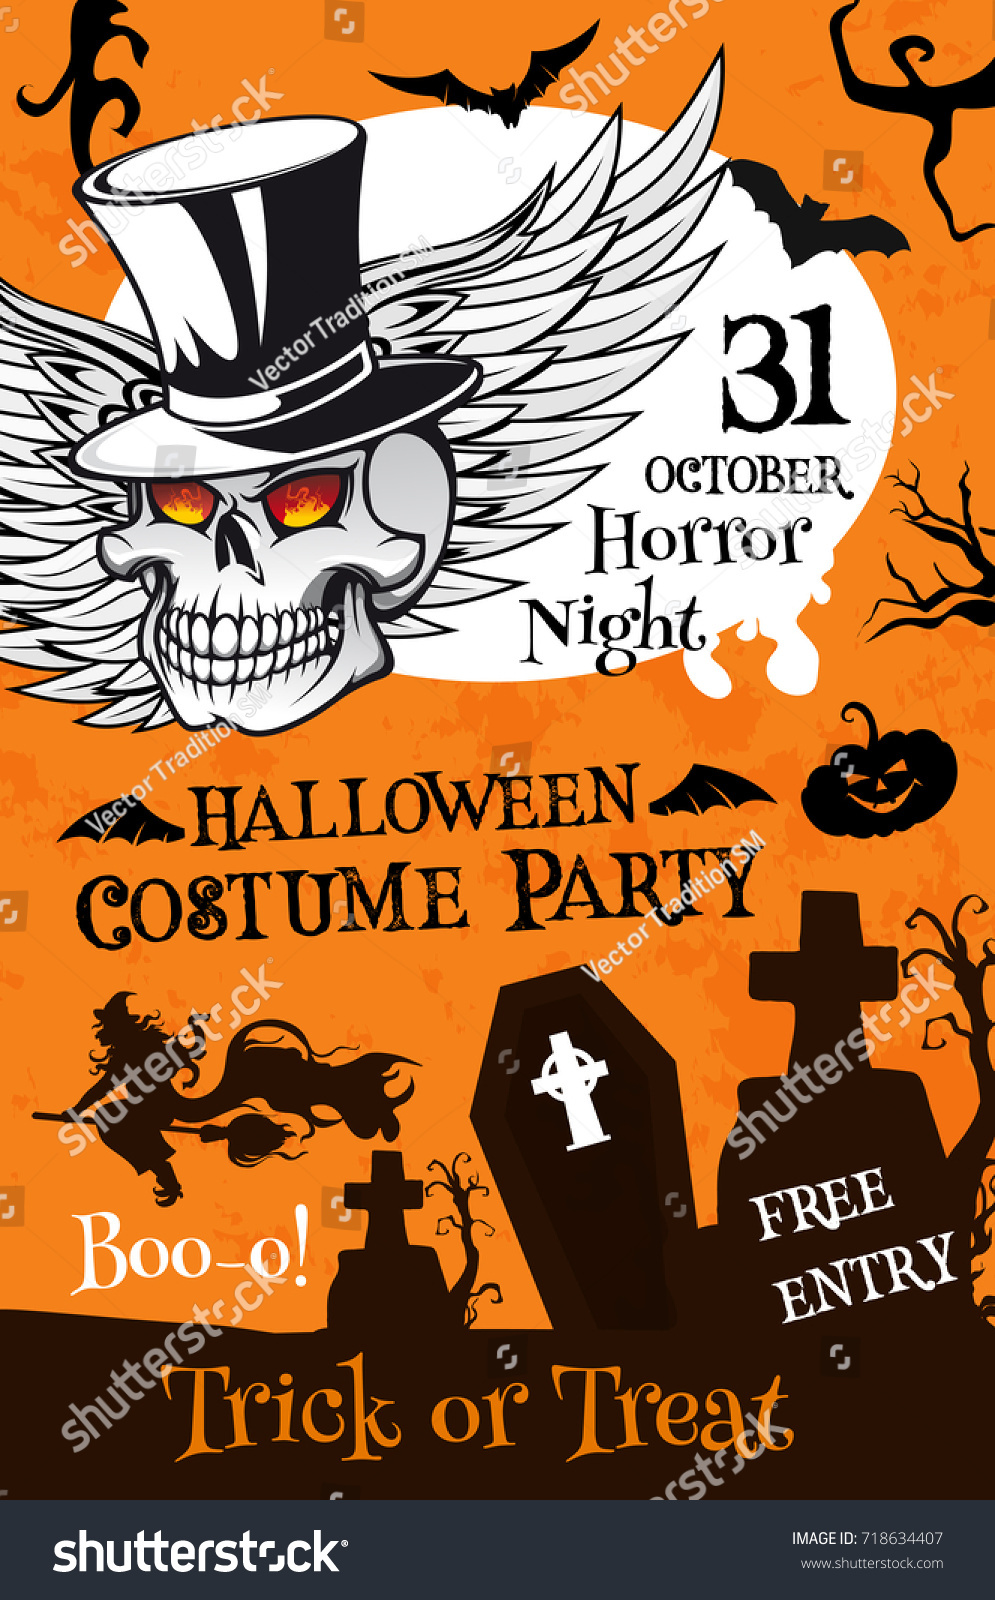 Halloween Costume Party Poster Template Holiday Stock Vector Royalty Free